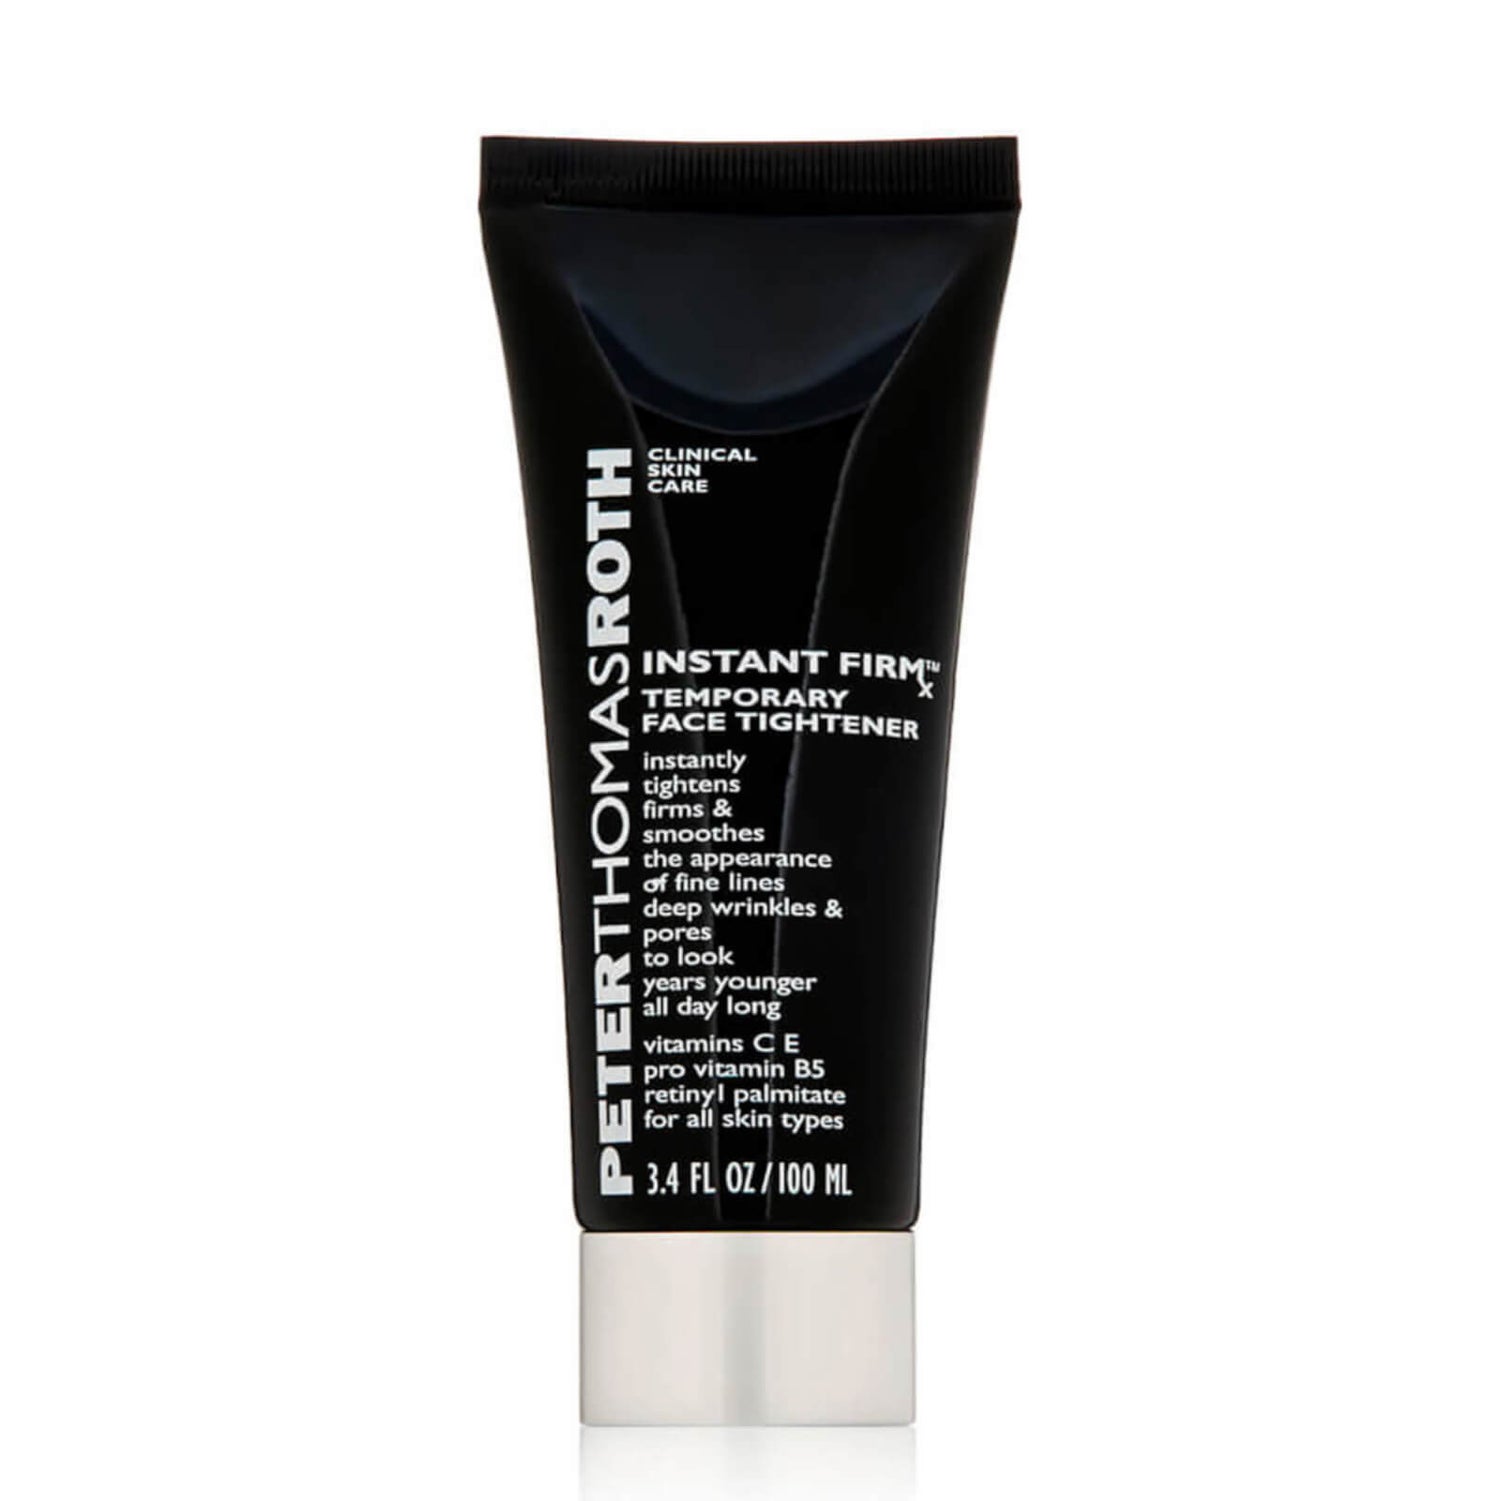 Peter Thomas Roth Instant FIRMx Temporary Face Tightener (3.4 fl. oz.)